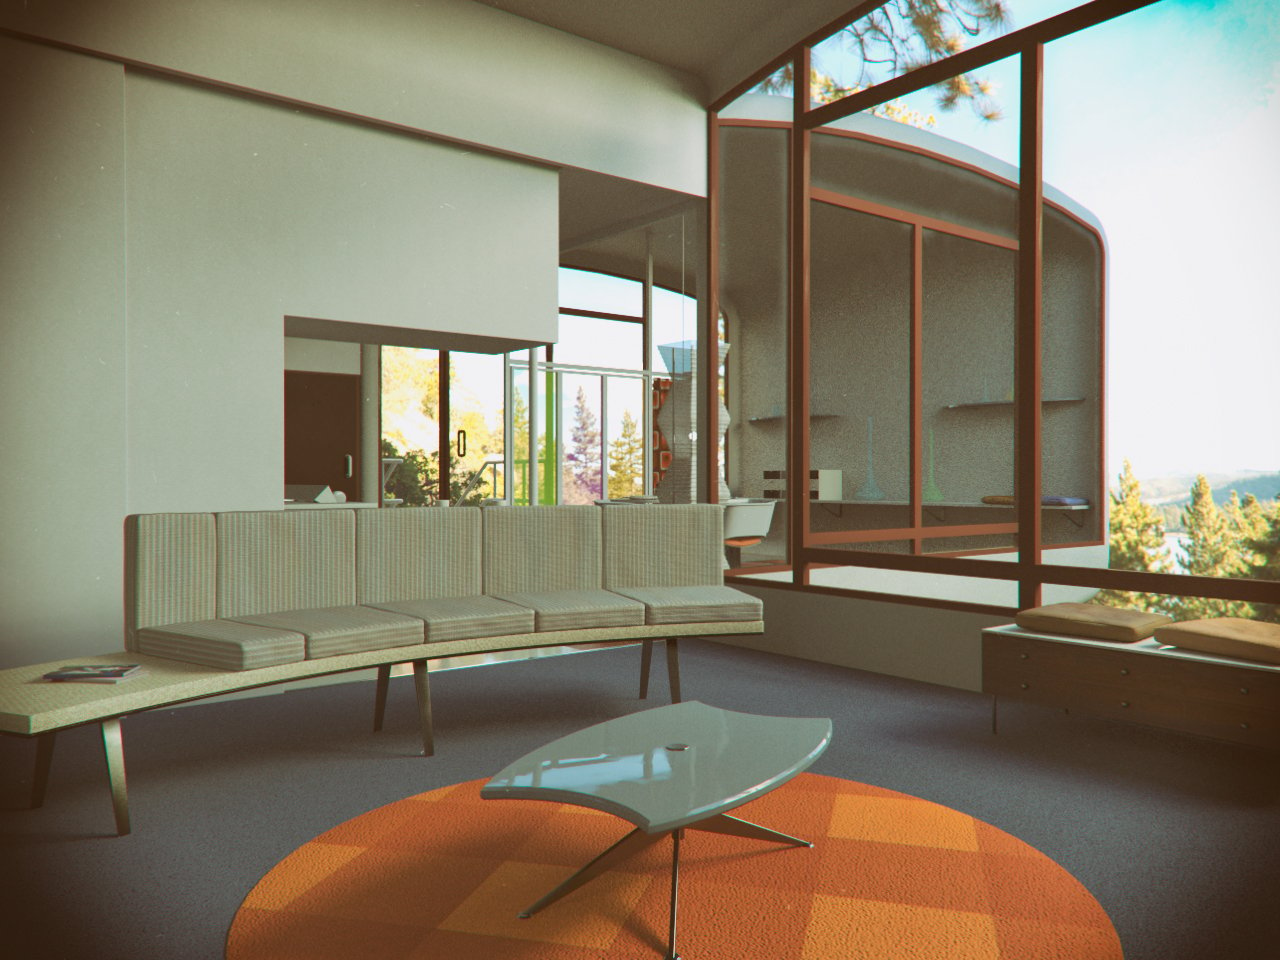 70s Modern House by: Mely3D, 3D Models by Daz 3D